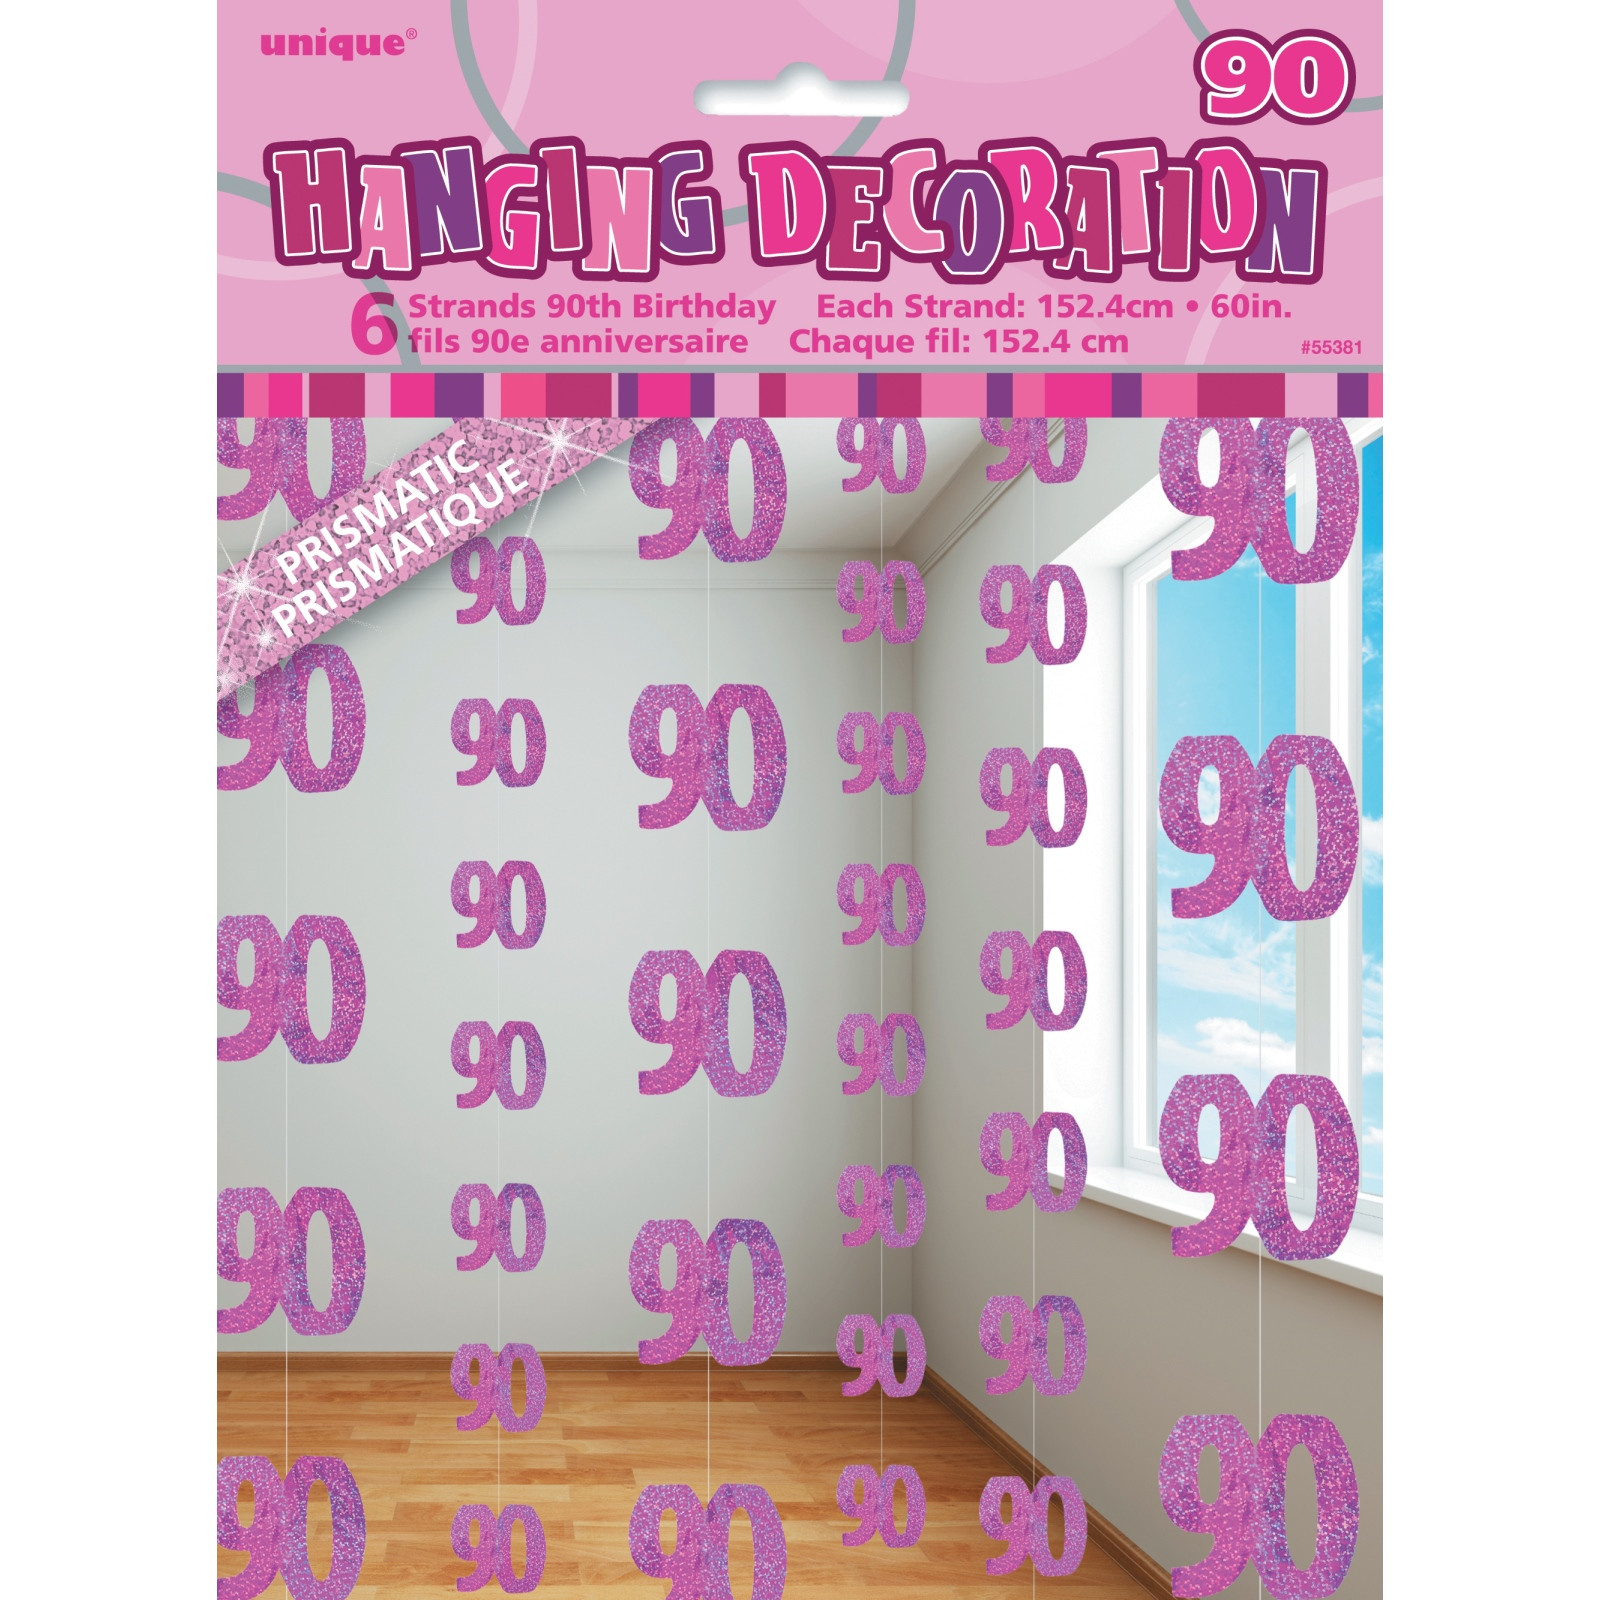 90th Birthday Party Decorations
 GLITZ PINK 90TH BIRTHDAY PARTY SUPPLIES 6 DANGLING HANGING